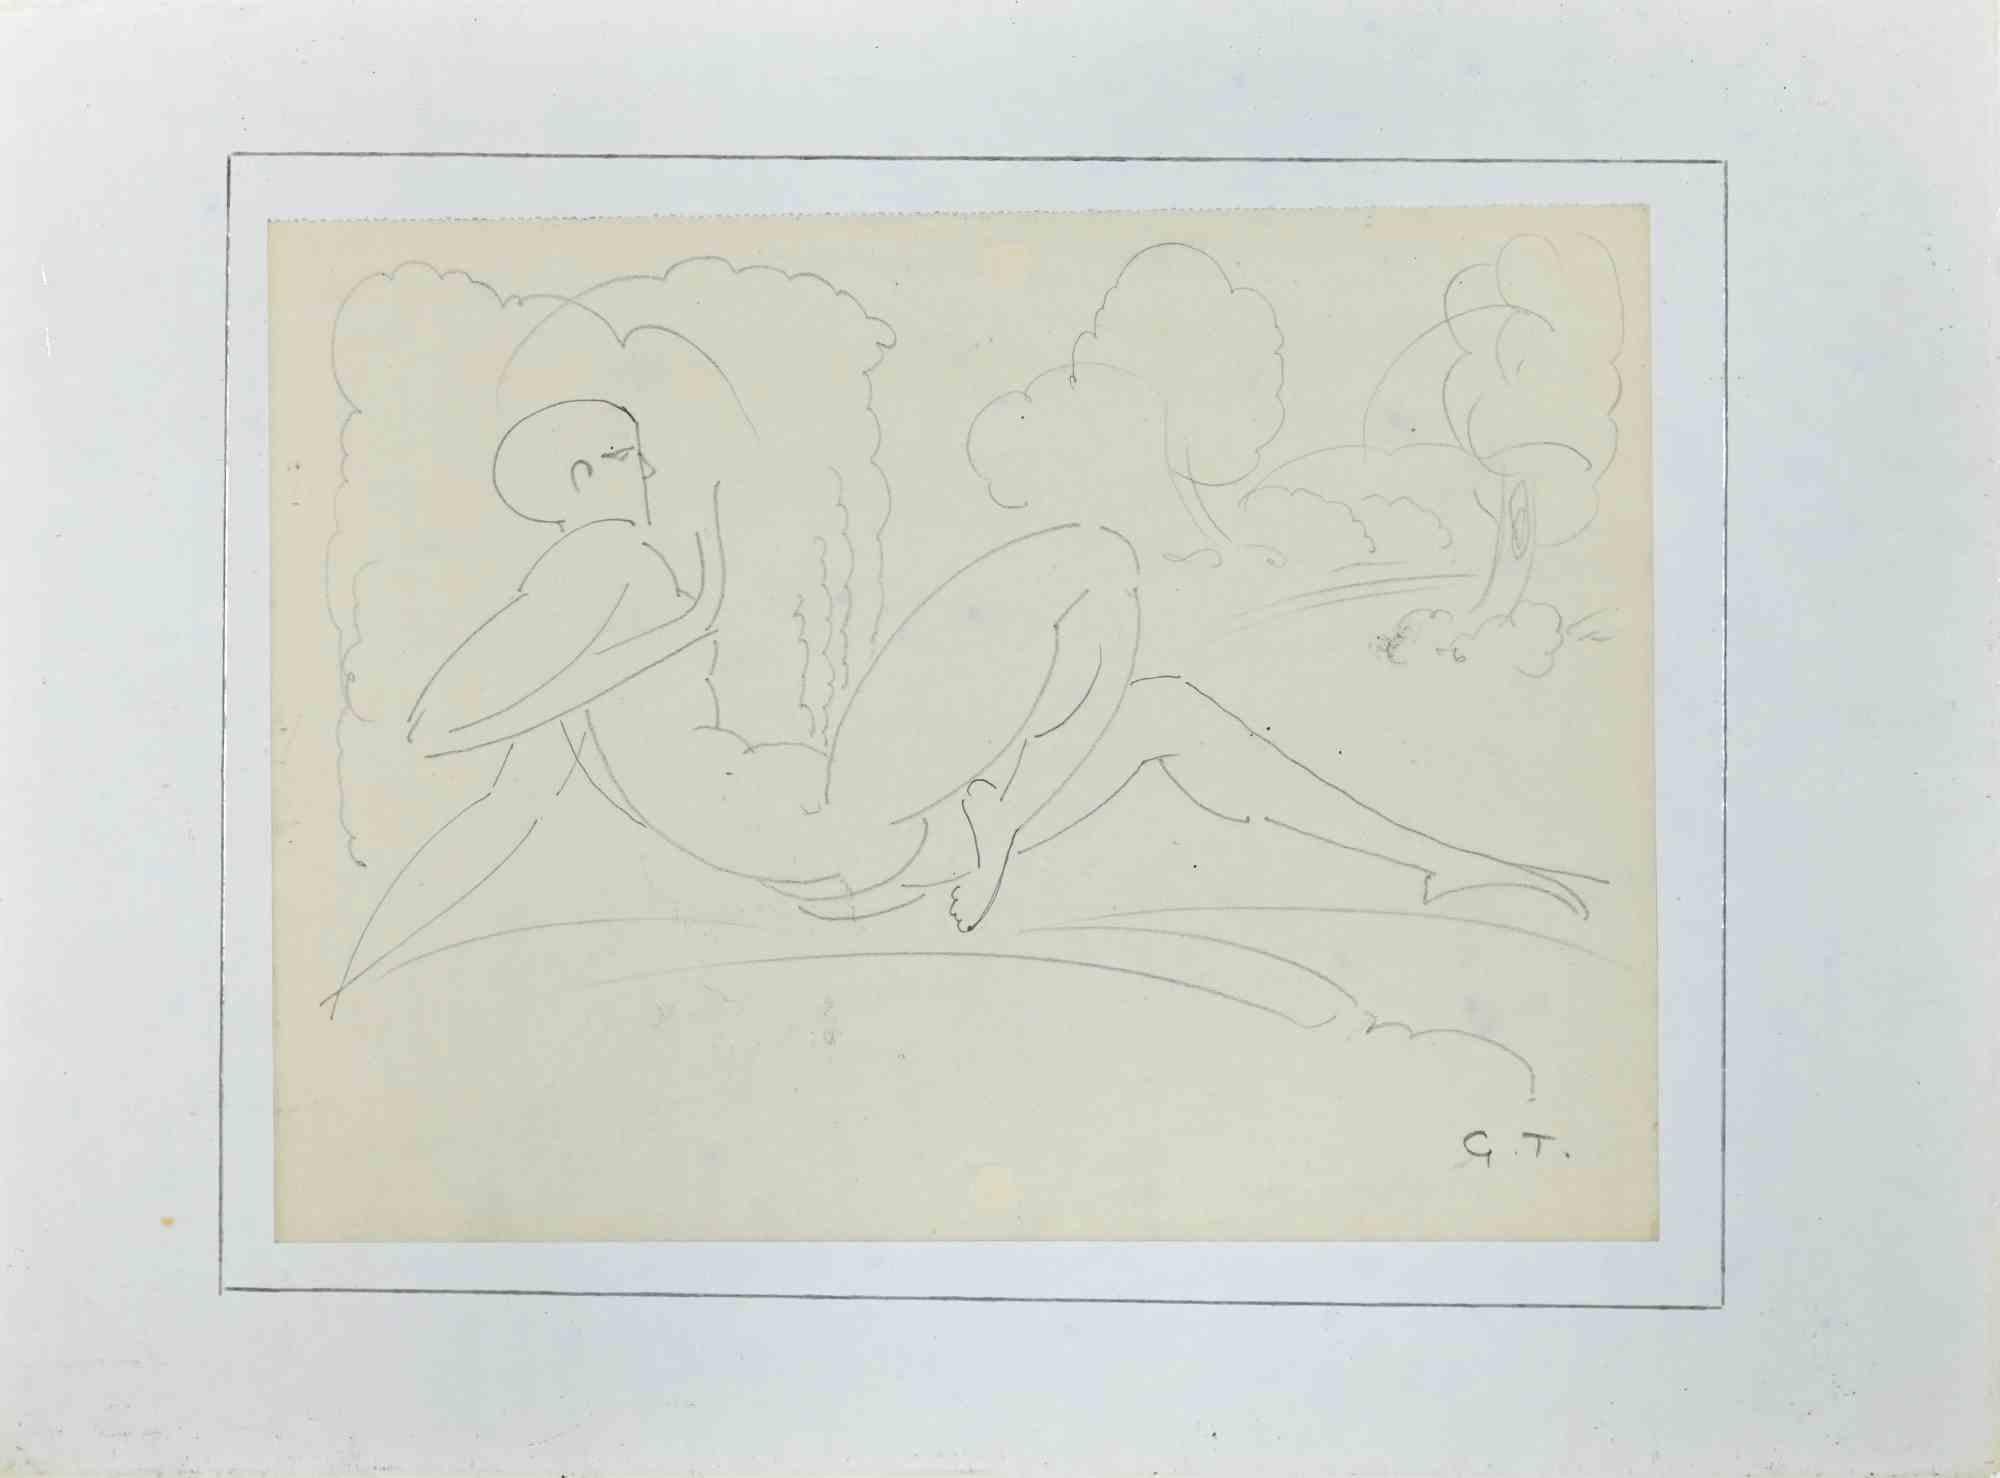 Georges-Henri Tribout Figurative Art - Reclined Nude - Original Pencil Drawing by George-Henri Tribout - 1950s